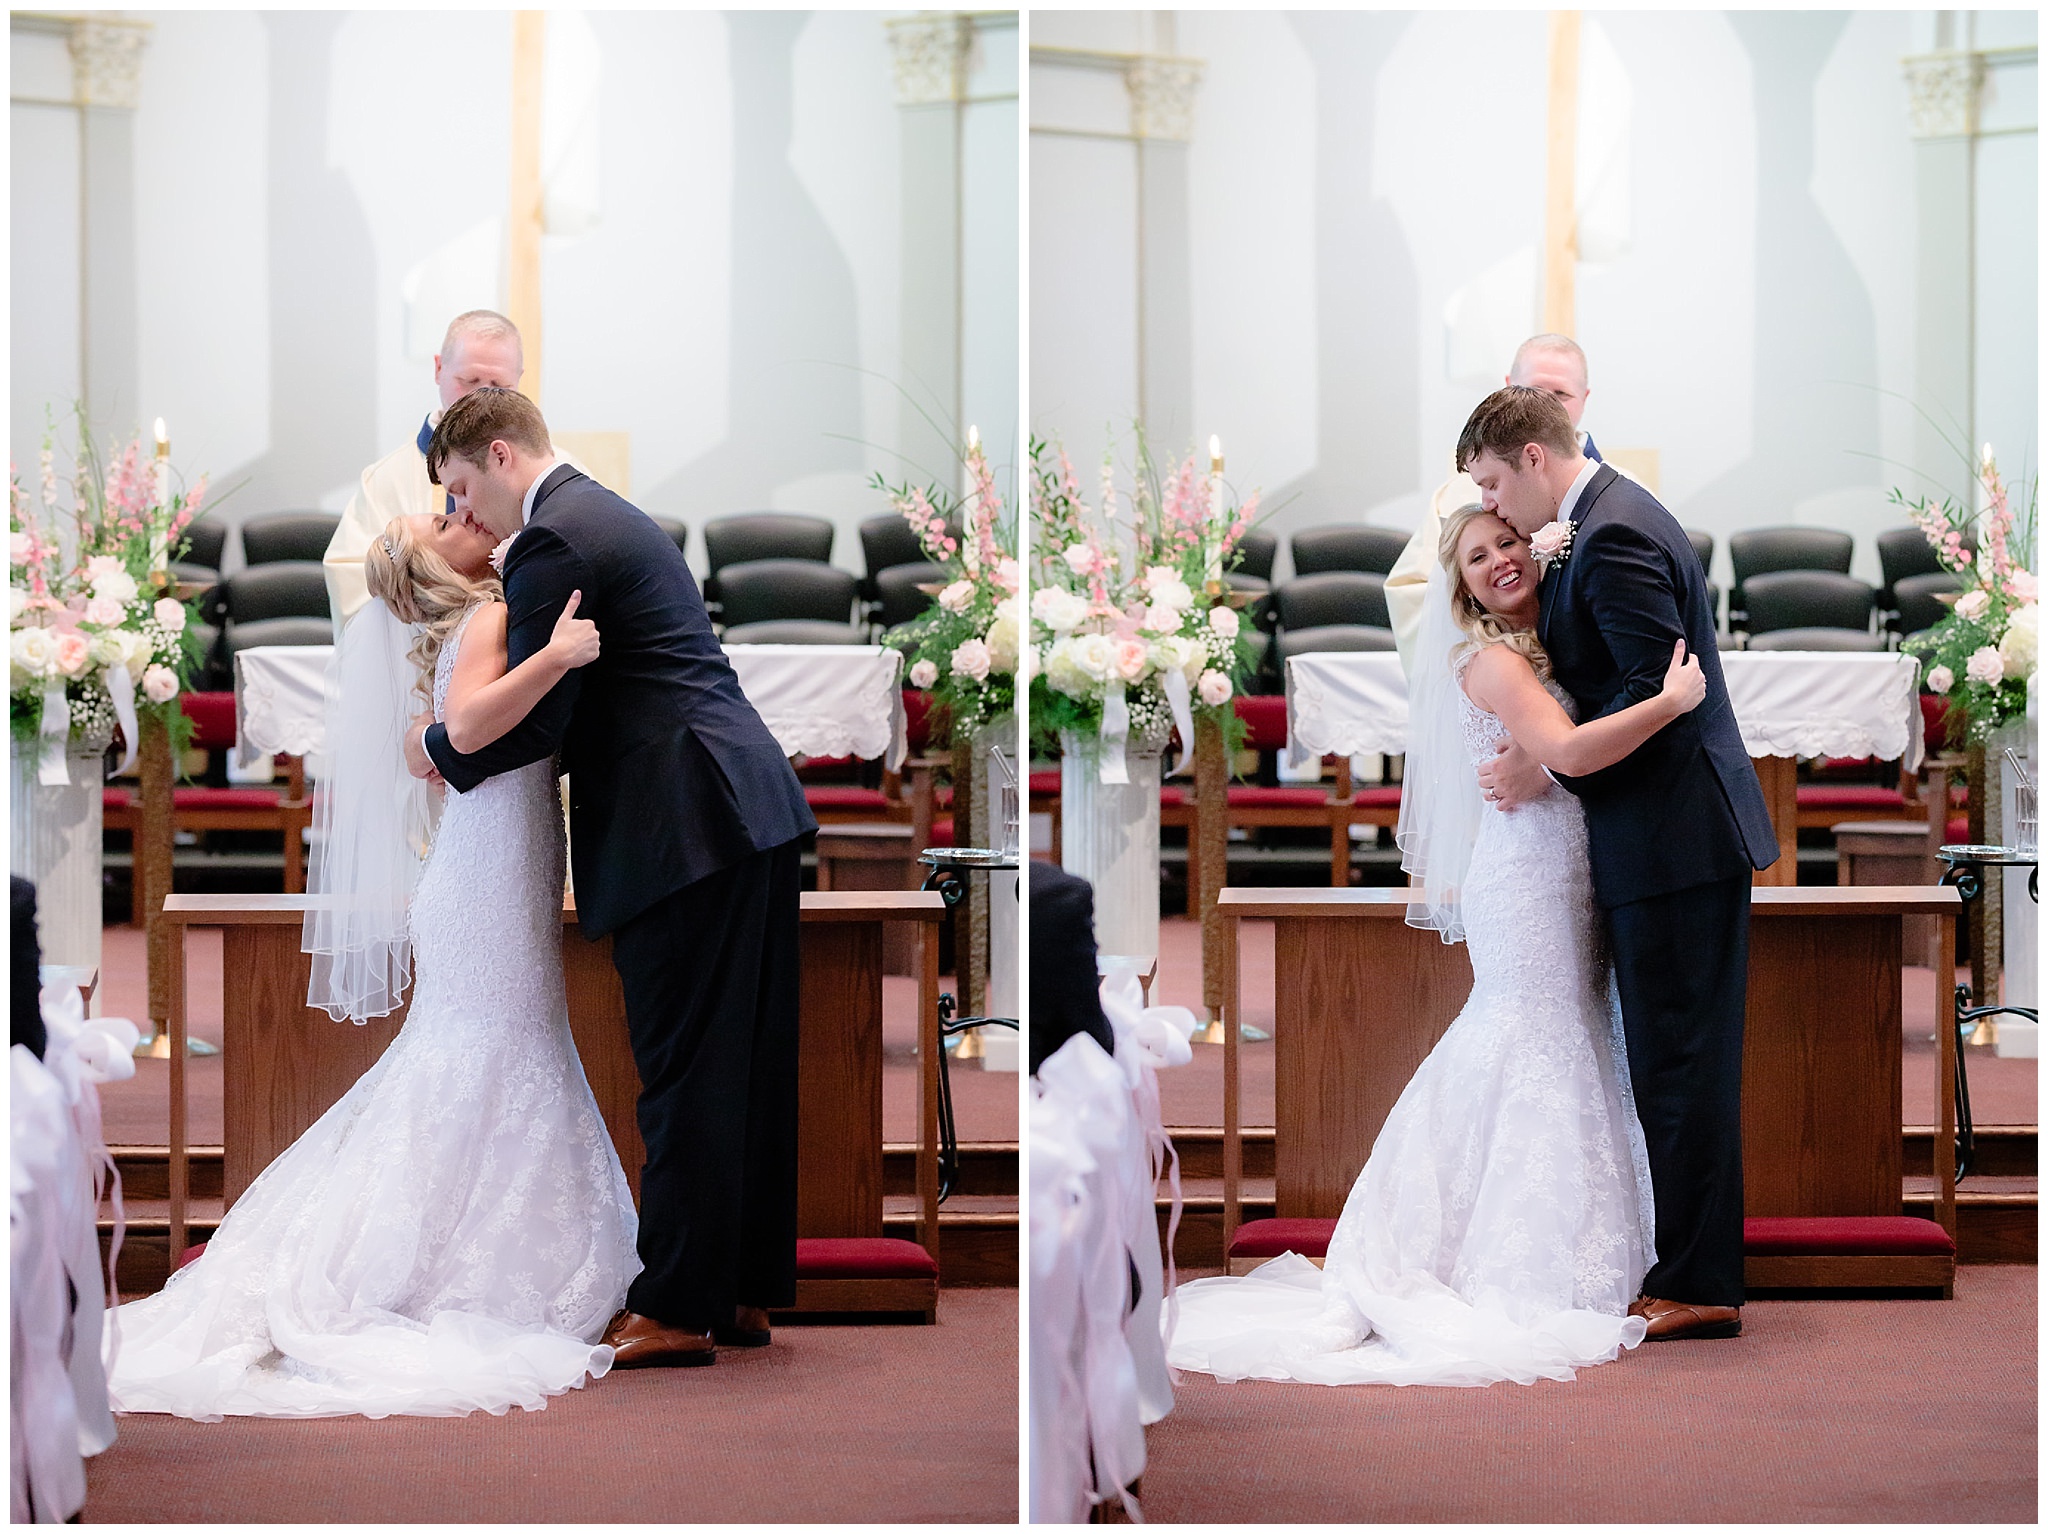 Bride & groom's first kiss at Duquesne University